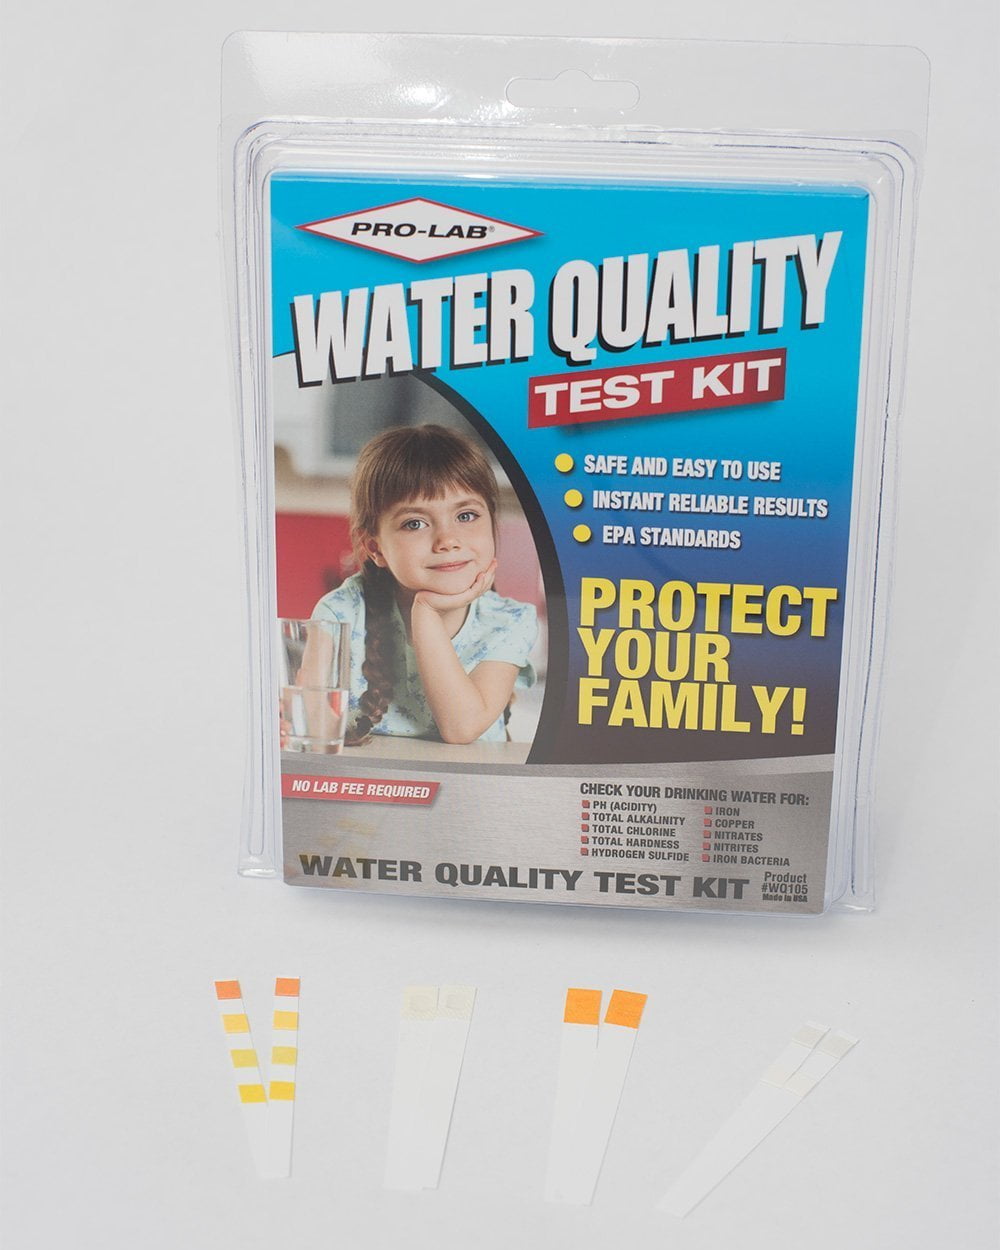 PRO-LAB Radon Gas Test Kit - Easy to Use, Reliable Results in 48